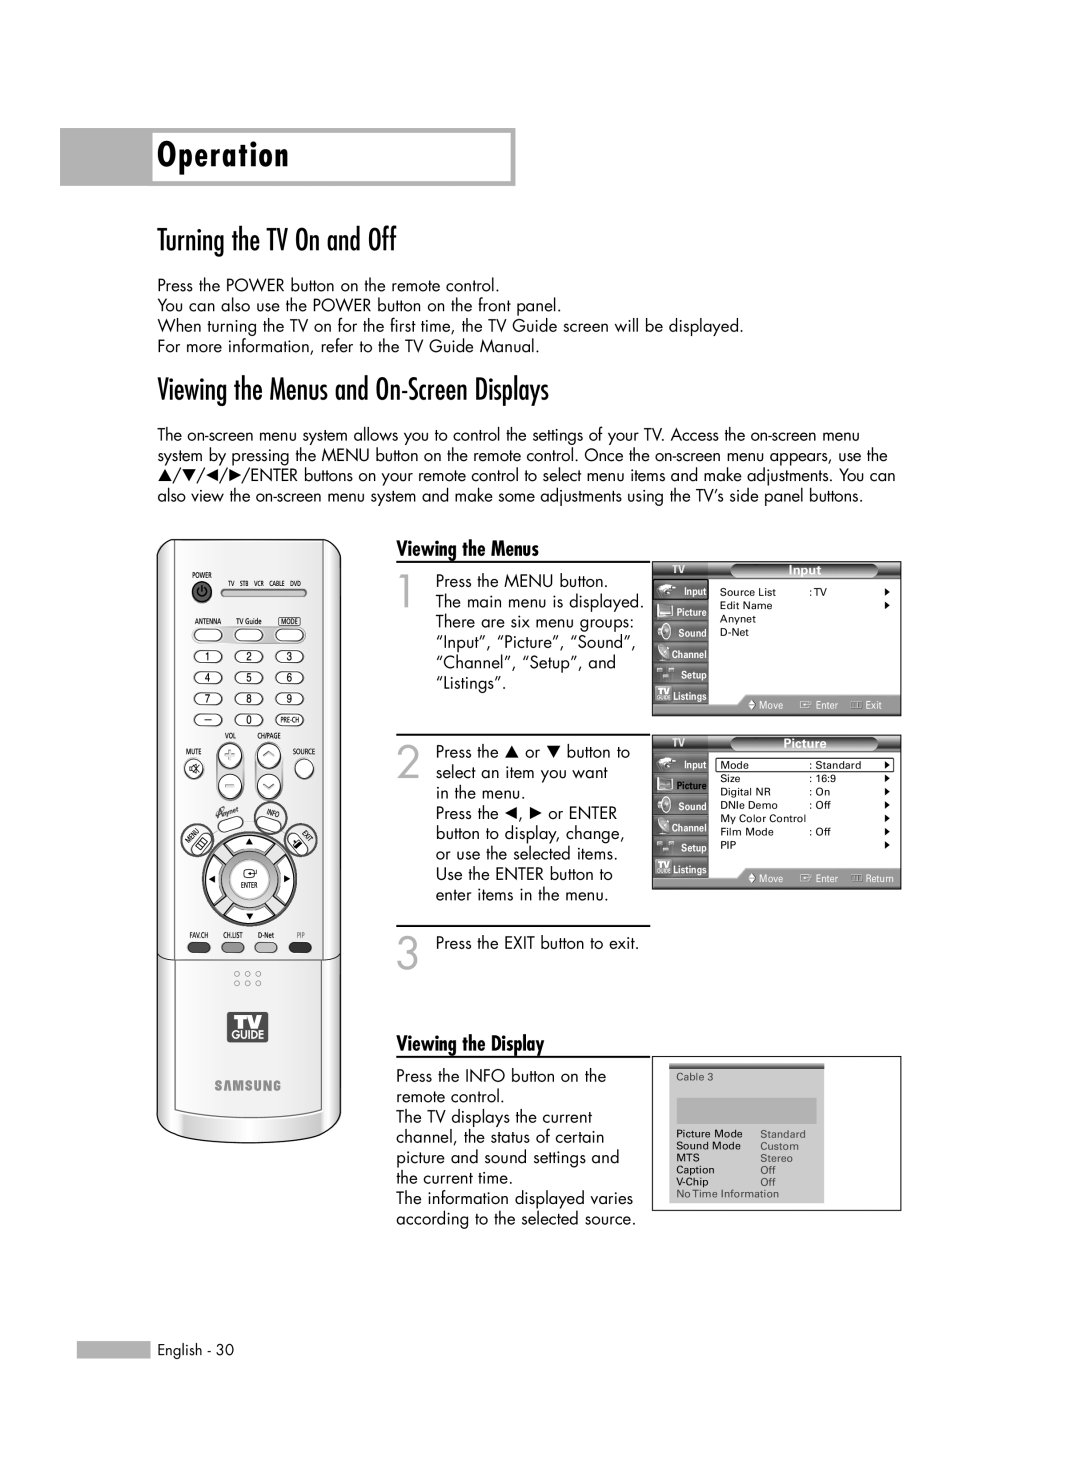 Samsung HL-R6178W manual Operation, Turning the TV On and Off, Viewing the Menus and On-ScreenDisplays, Viewing the Display 